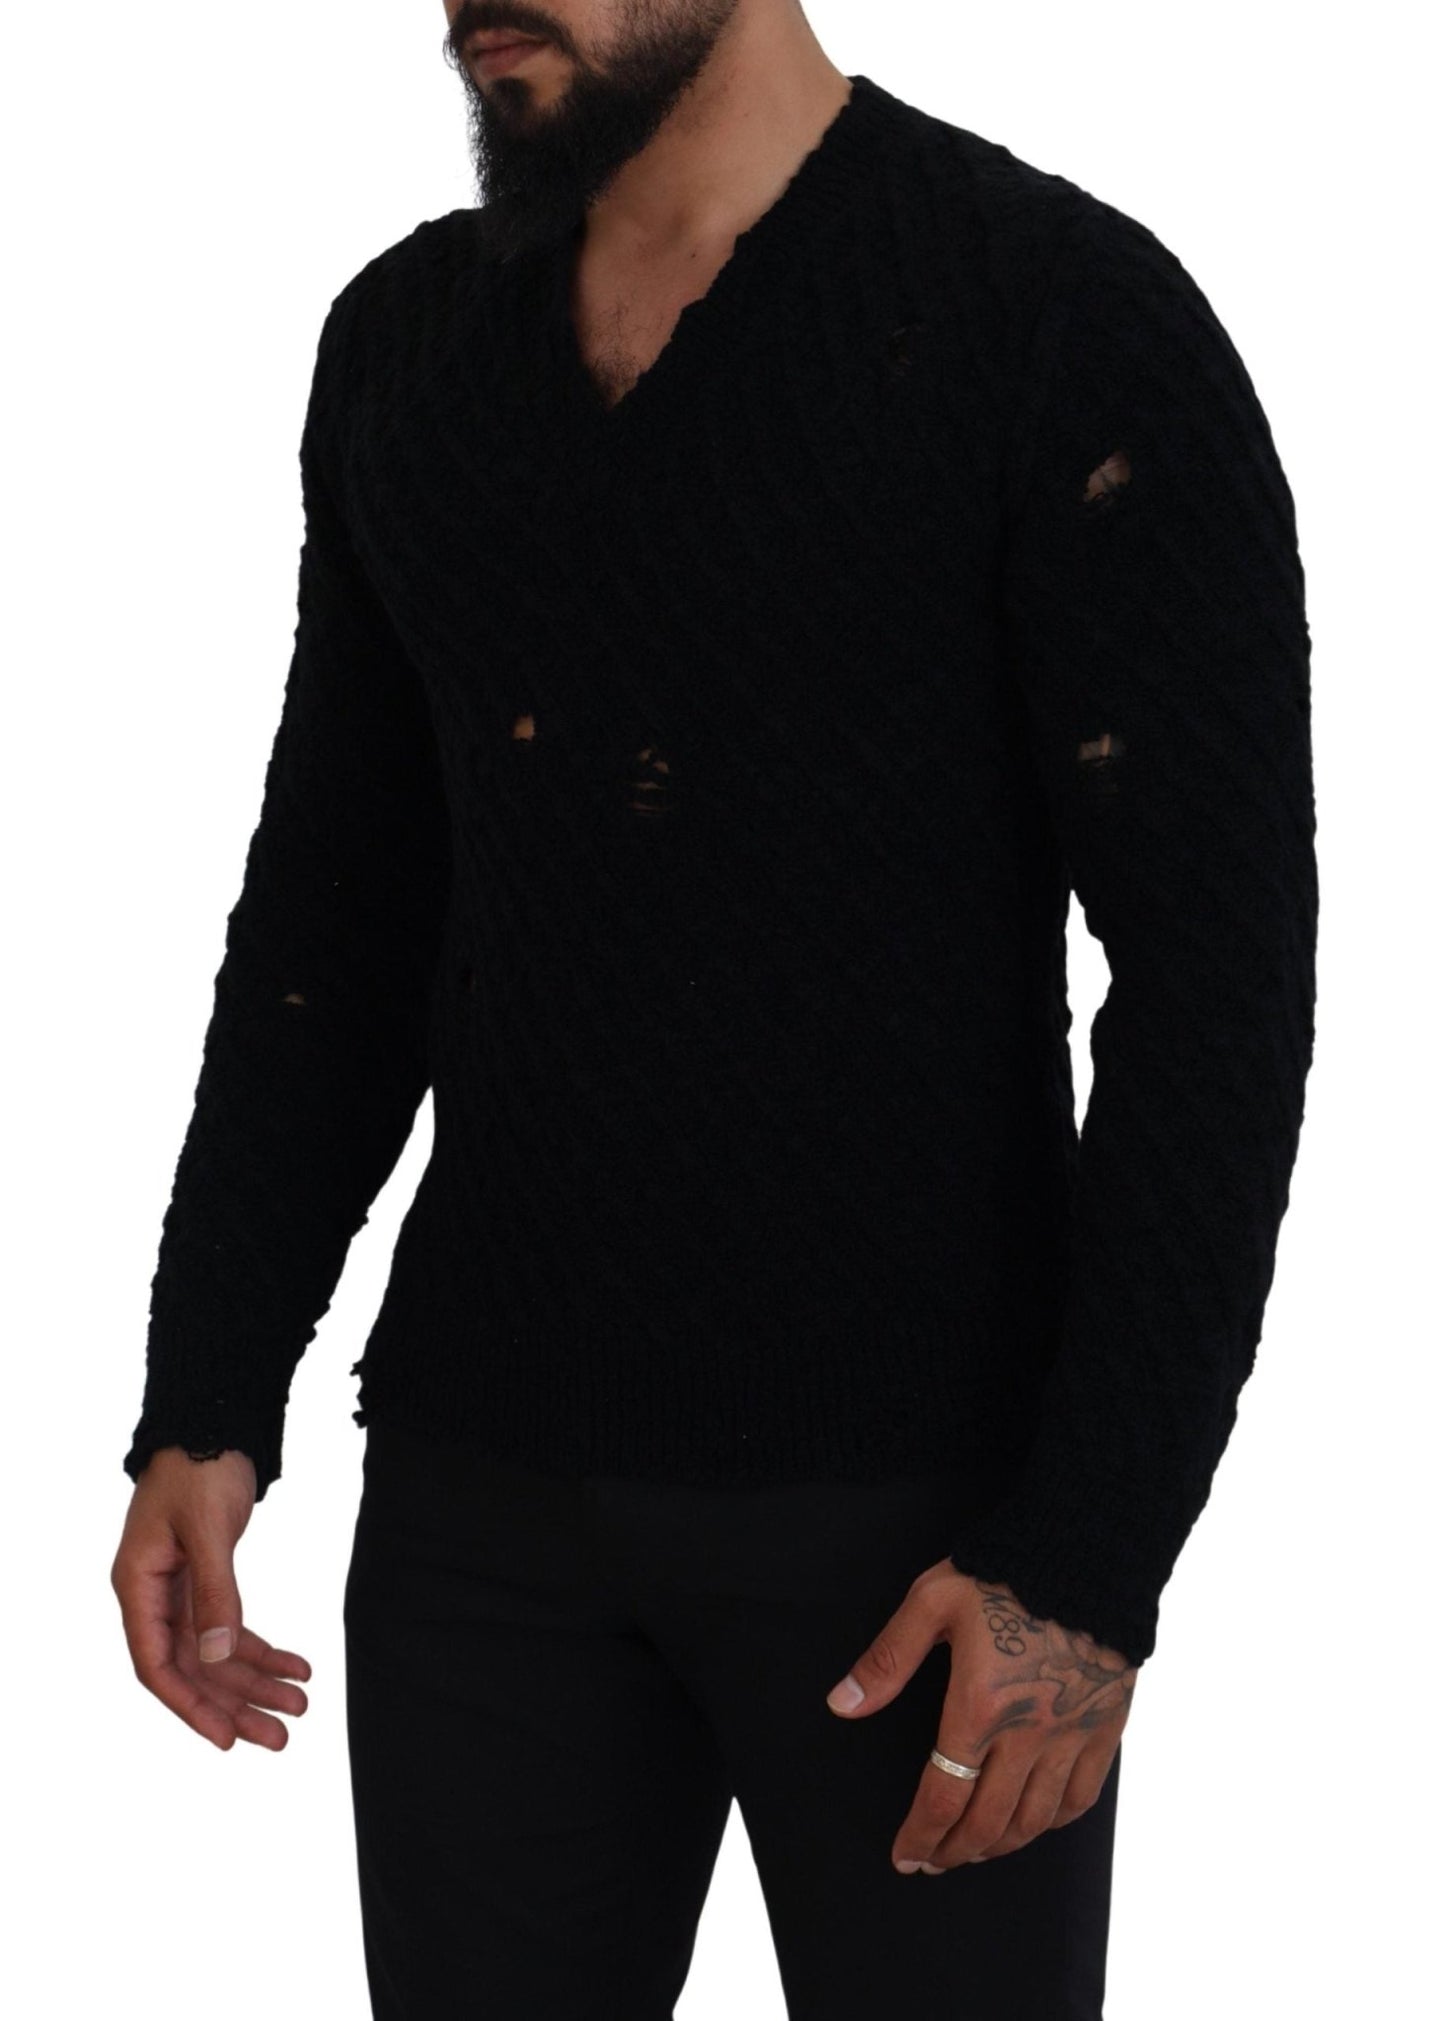 Dolce & Gabbana Black Wool V-neck Knitted Pullover Sweater